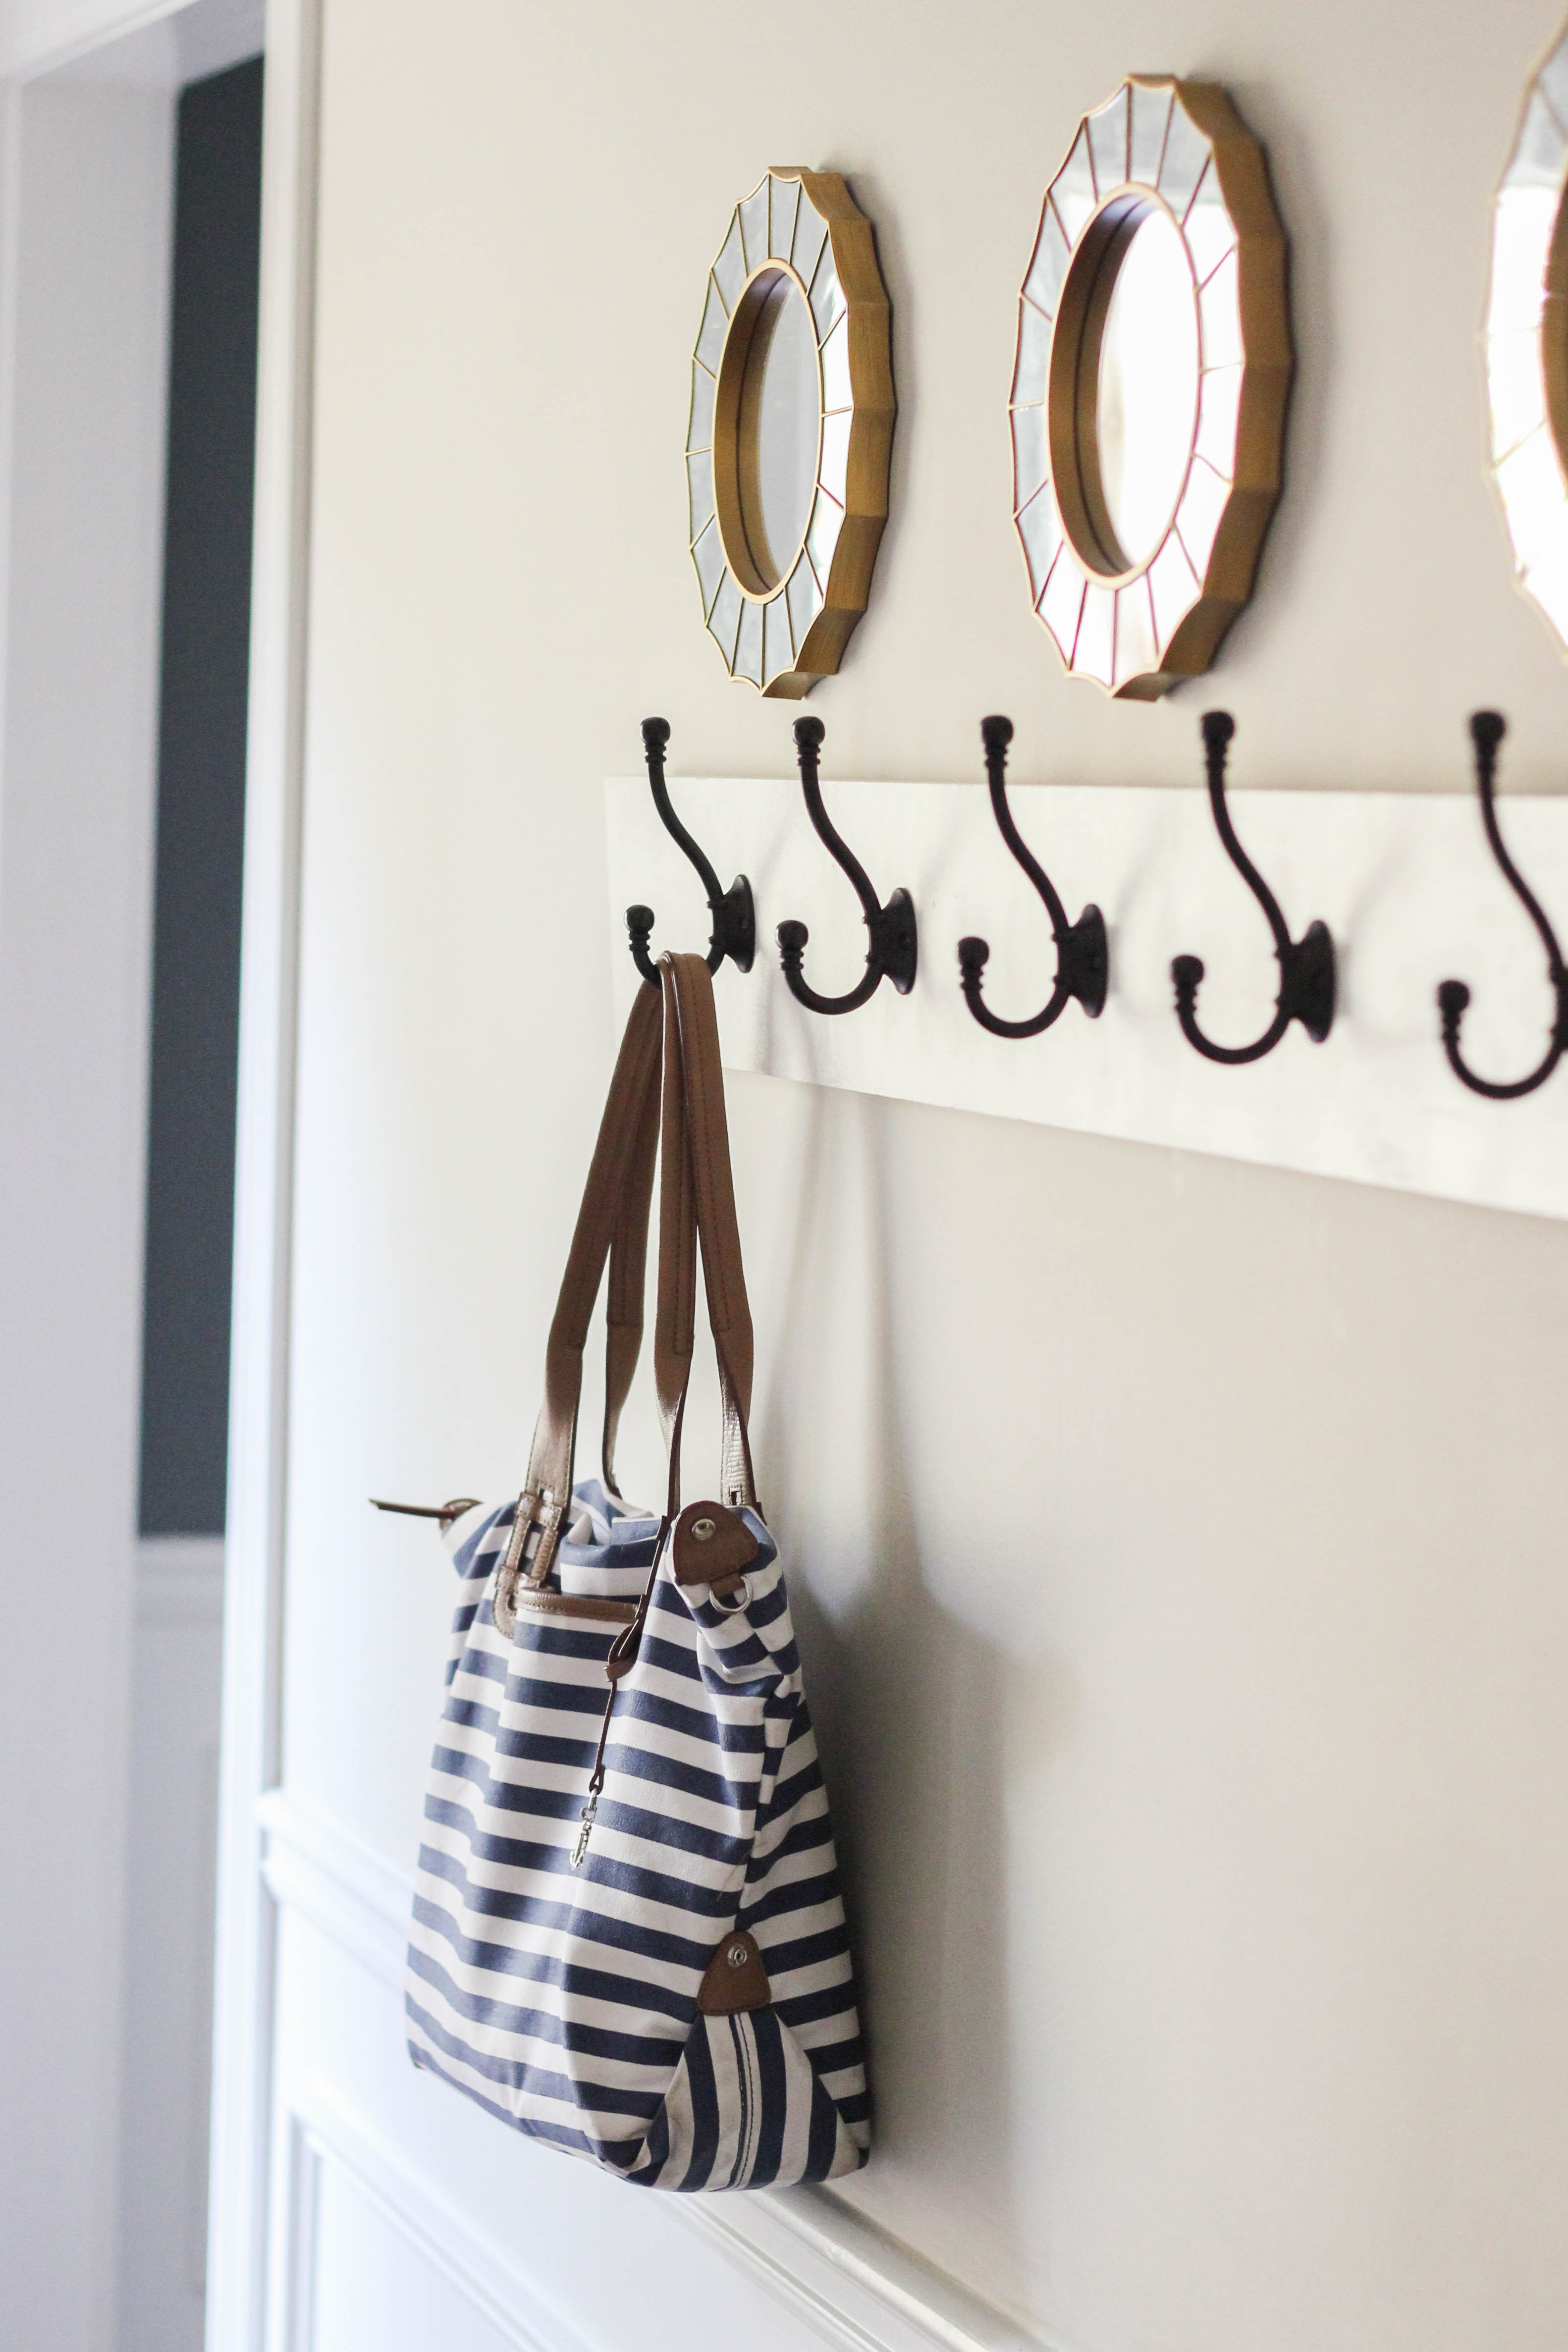 How to Build a Wall Mounted Coat Rack - Erin Spain